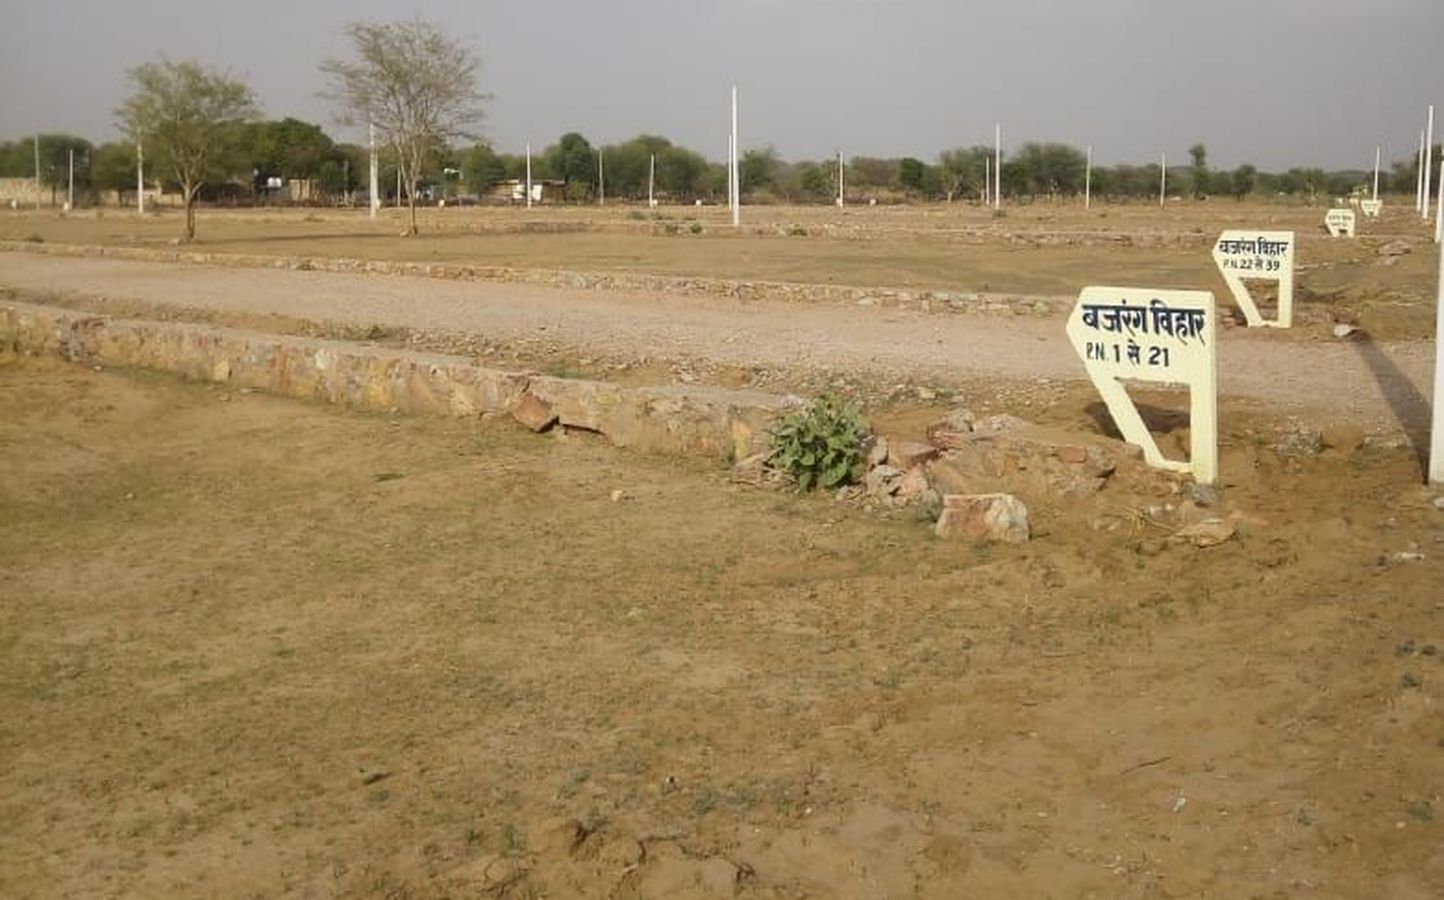 Illegal colony on agricultural land in chomu